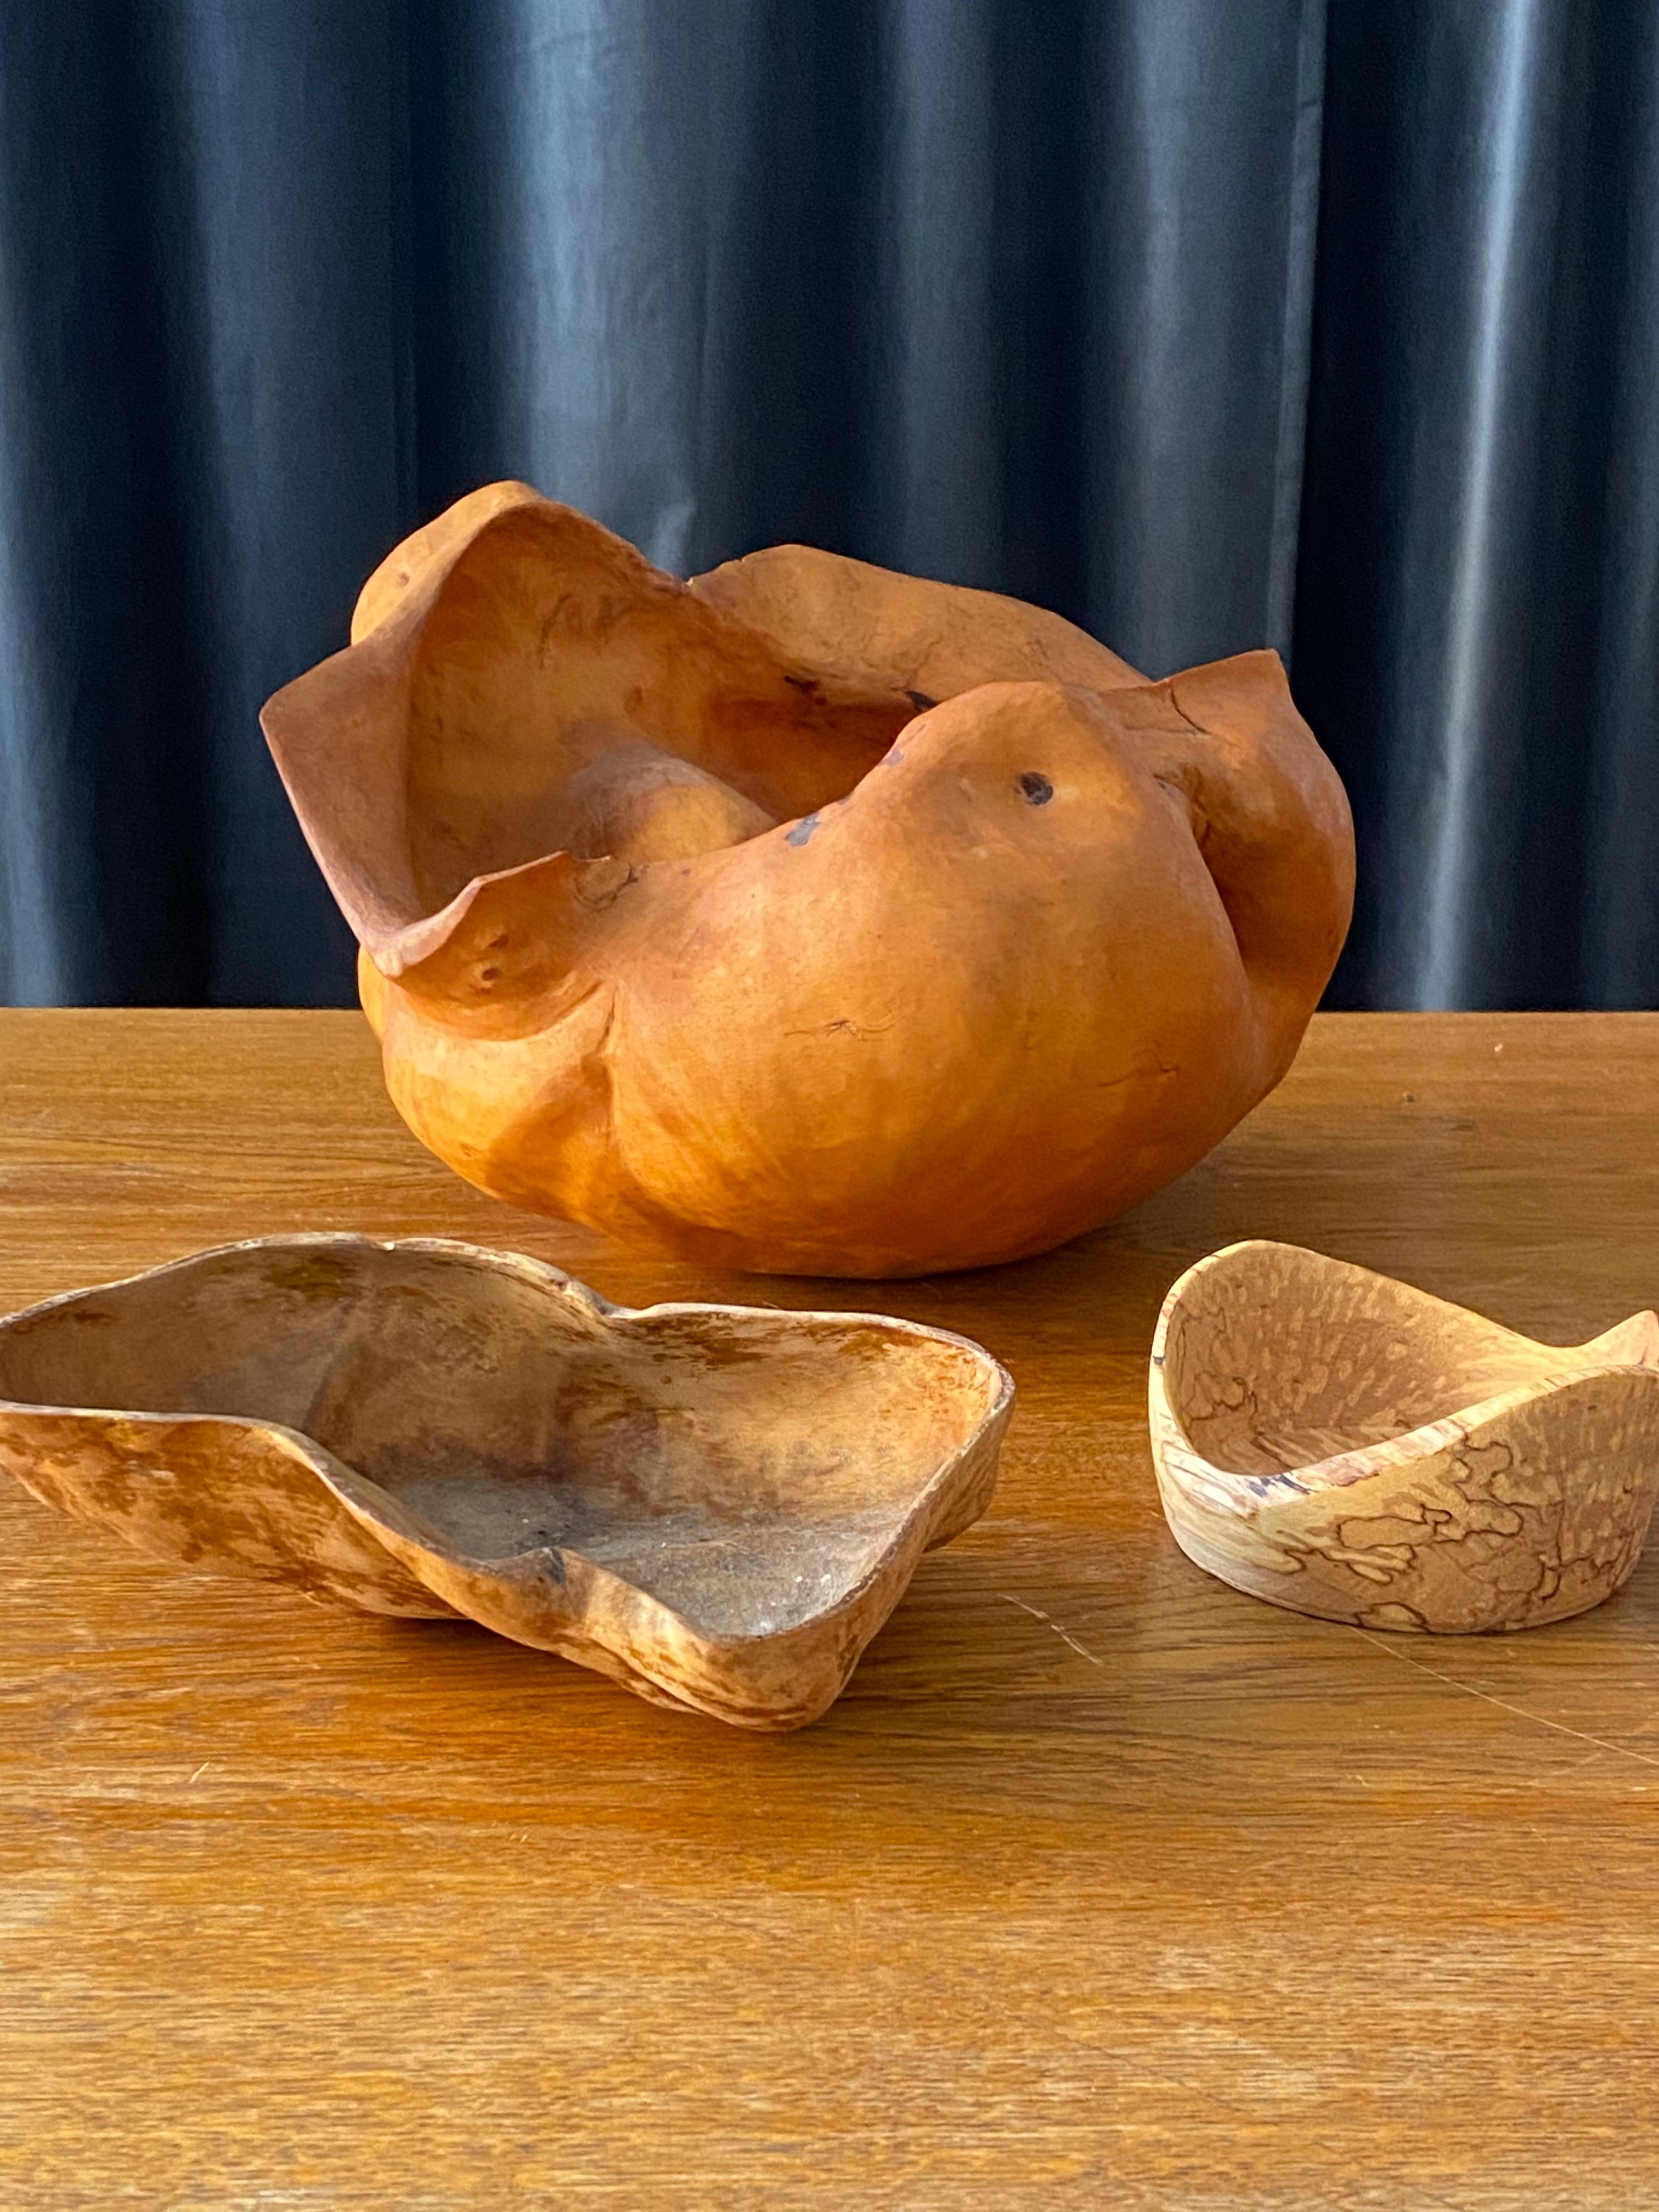 Mid-20th Century Swedish Craft, Root Works, Organic Sculpted Wood, Sweden, 1950-1983